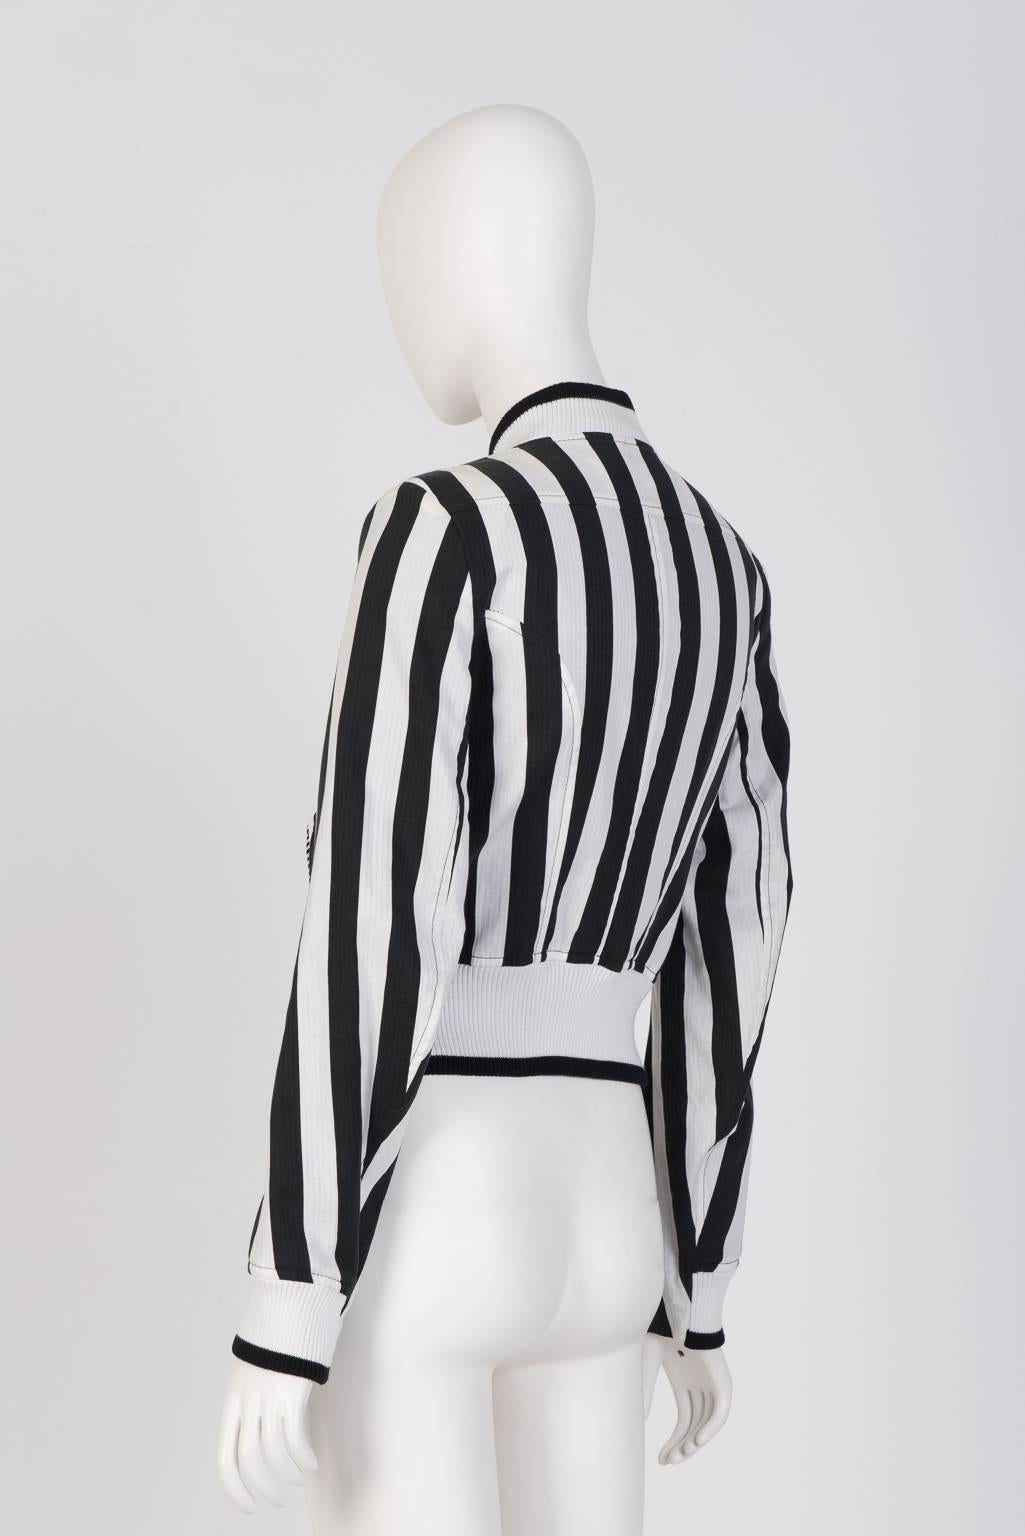 Ann Demeulemeester Stripe Bomber Jacket In Excellent Condition For Sale In Xiamen, Fujian